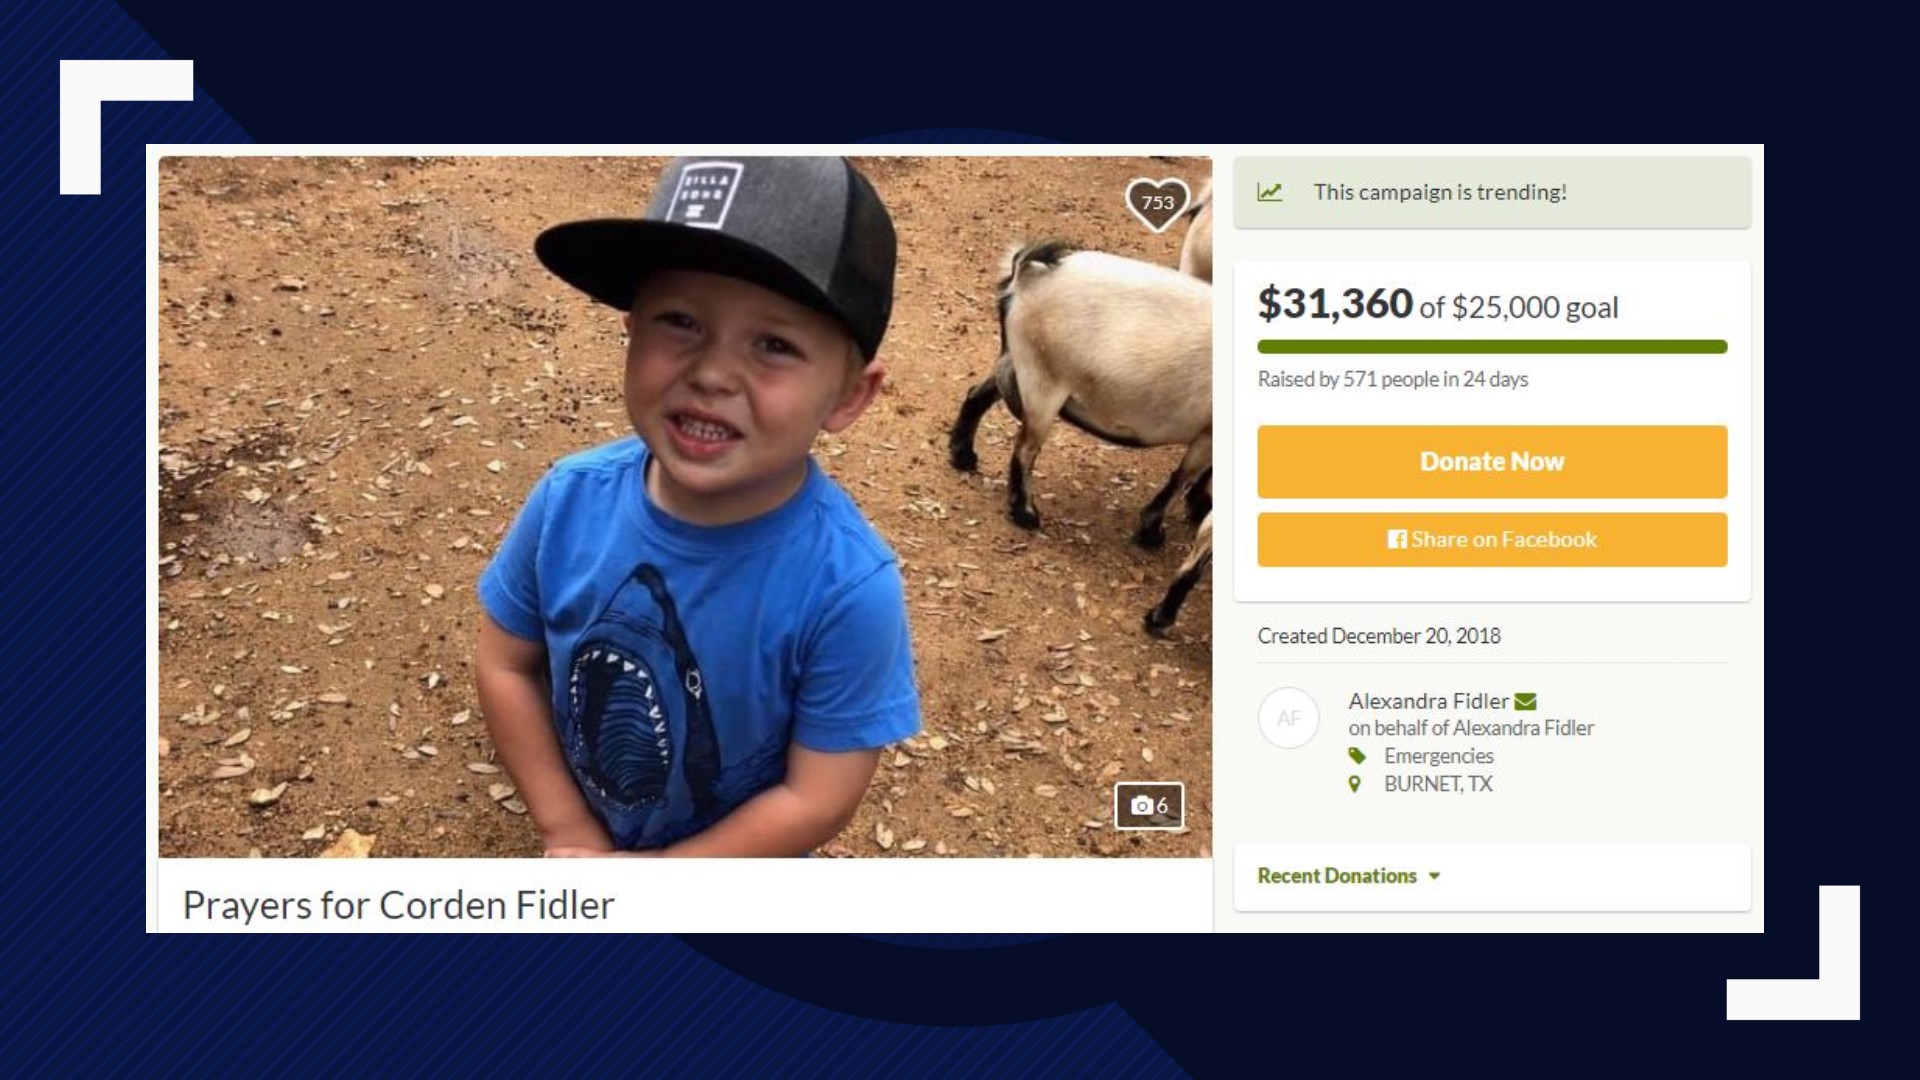 Before you go, there are 6 things you should know. Here's one of them: Corden Fidler, the young boy from Temple who was shot by his mother's estranged husband on Dec. 20 is improving in the recovery process. Plus, GoFundMe donations continue rising to fund his medical care.